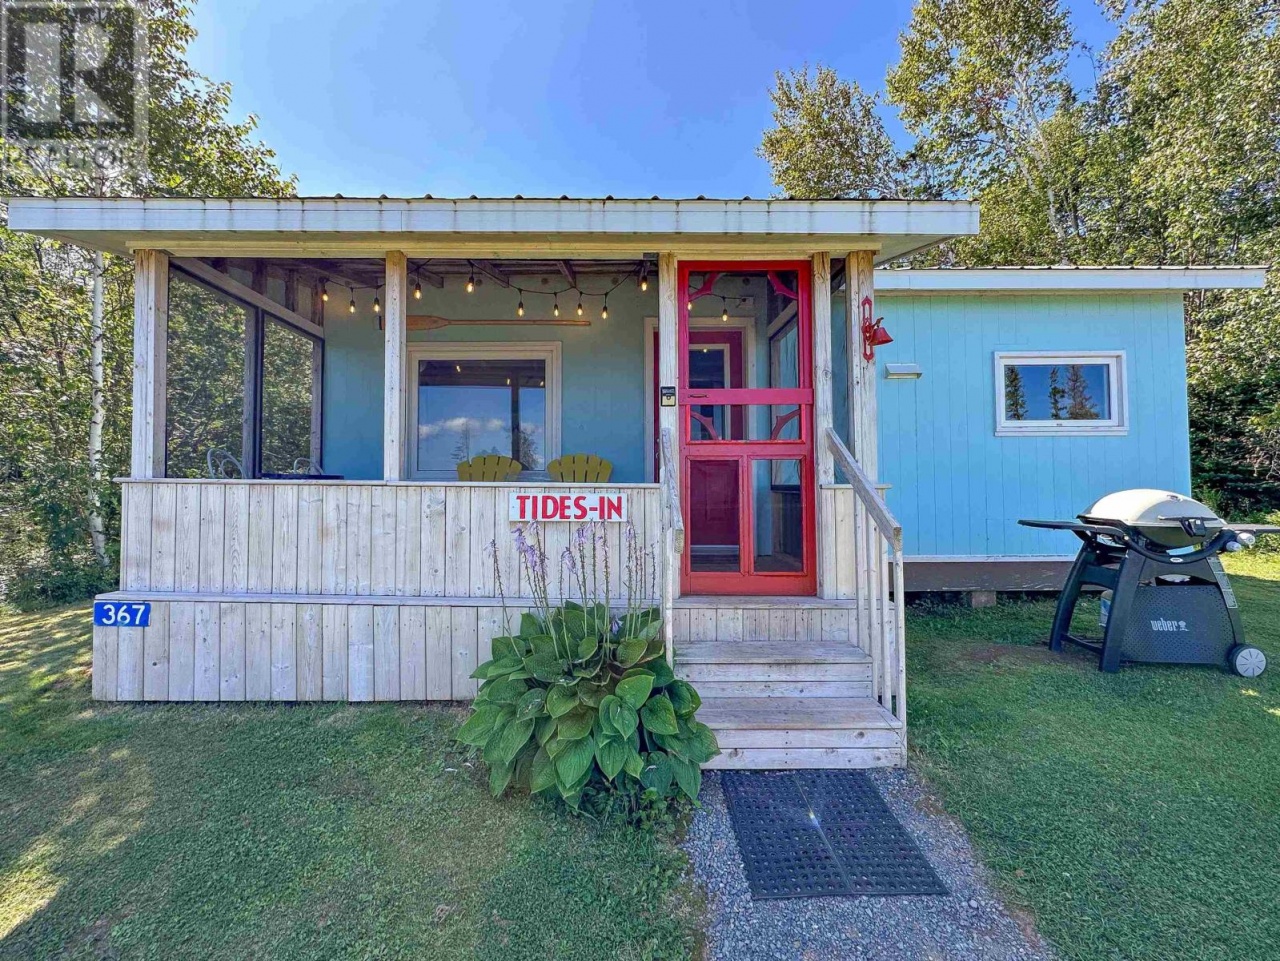 355, 359, 363, 367, 371 Morrison's Beach Road355, 359, 363, 367, 371 Morrison's Beach Road, Georgetown Royalty, Prince Edward Island C0A1L0, 4 Bedrooms Bedrooms, ,2 BathroomsBathrooms,Single Family,For Sale,355, 359, 363, 367, 371 Morrison's Beach Road,202318182